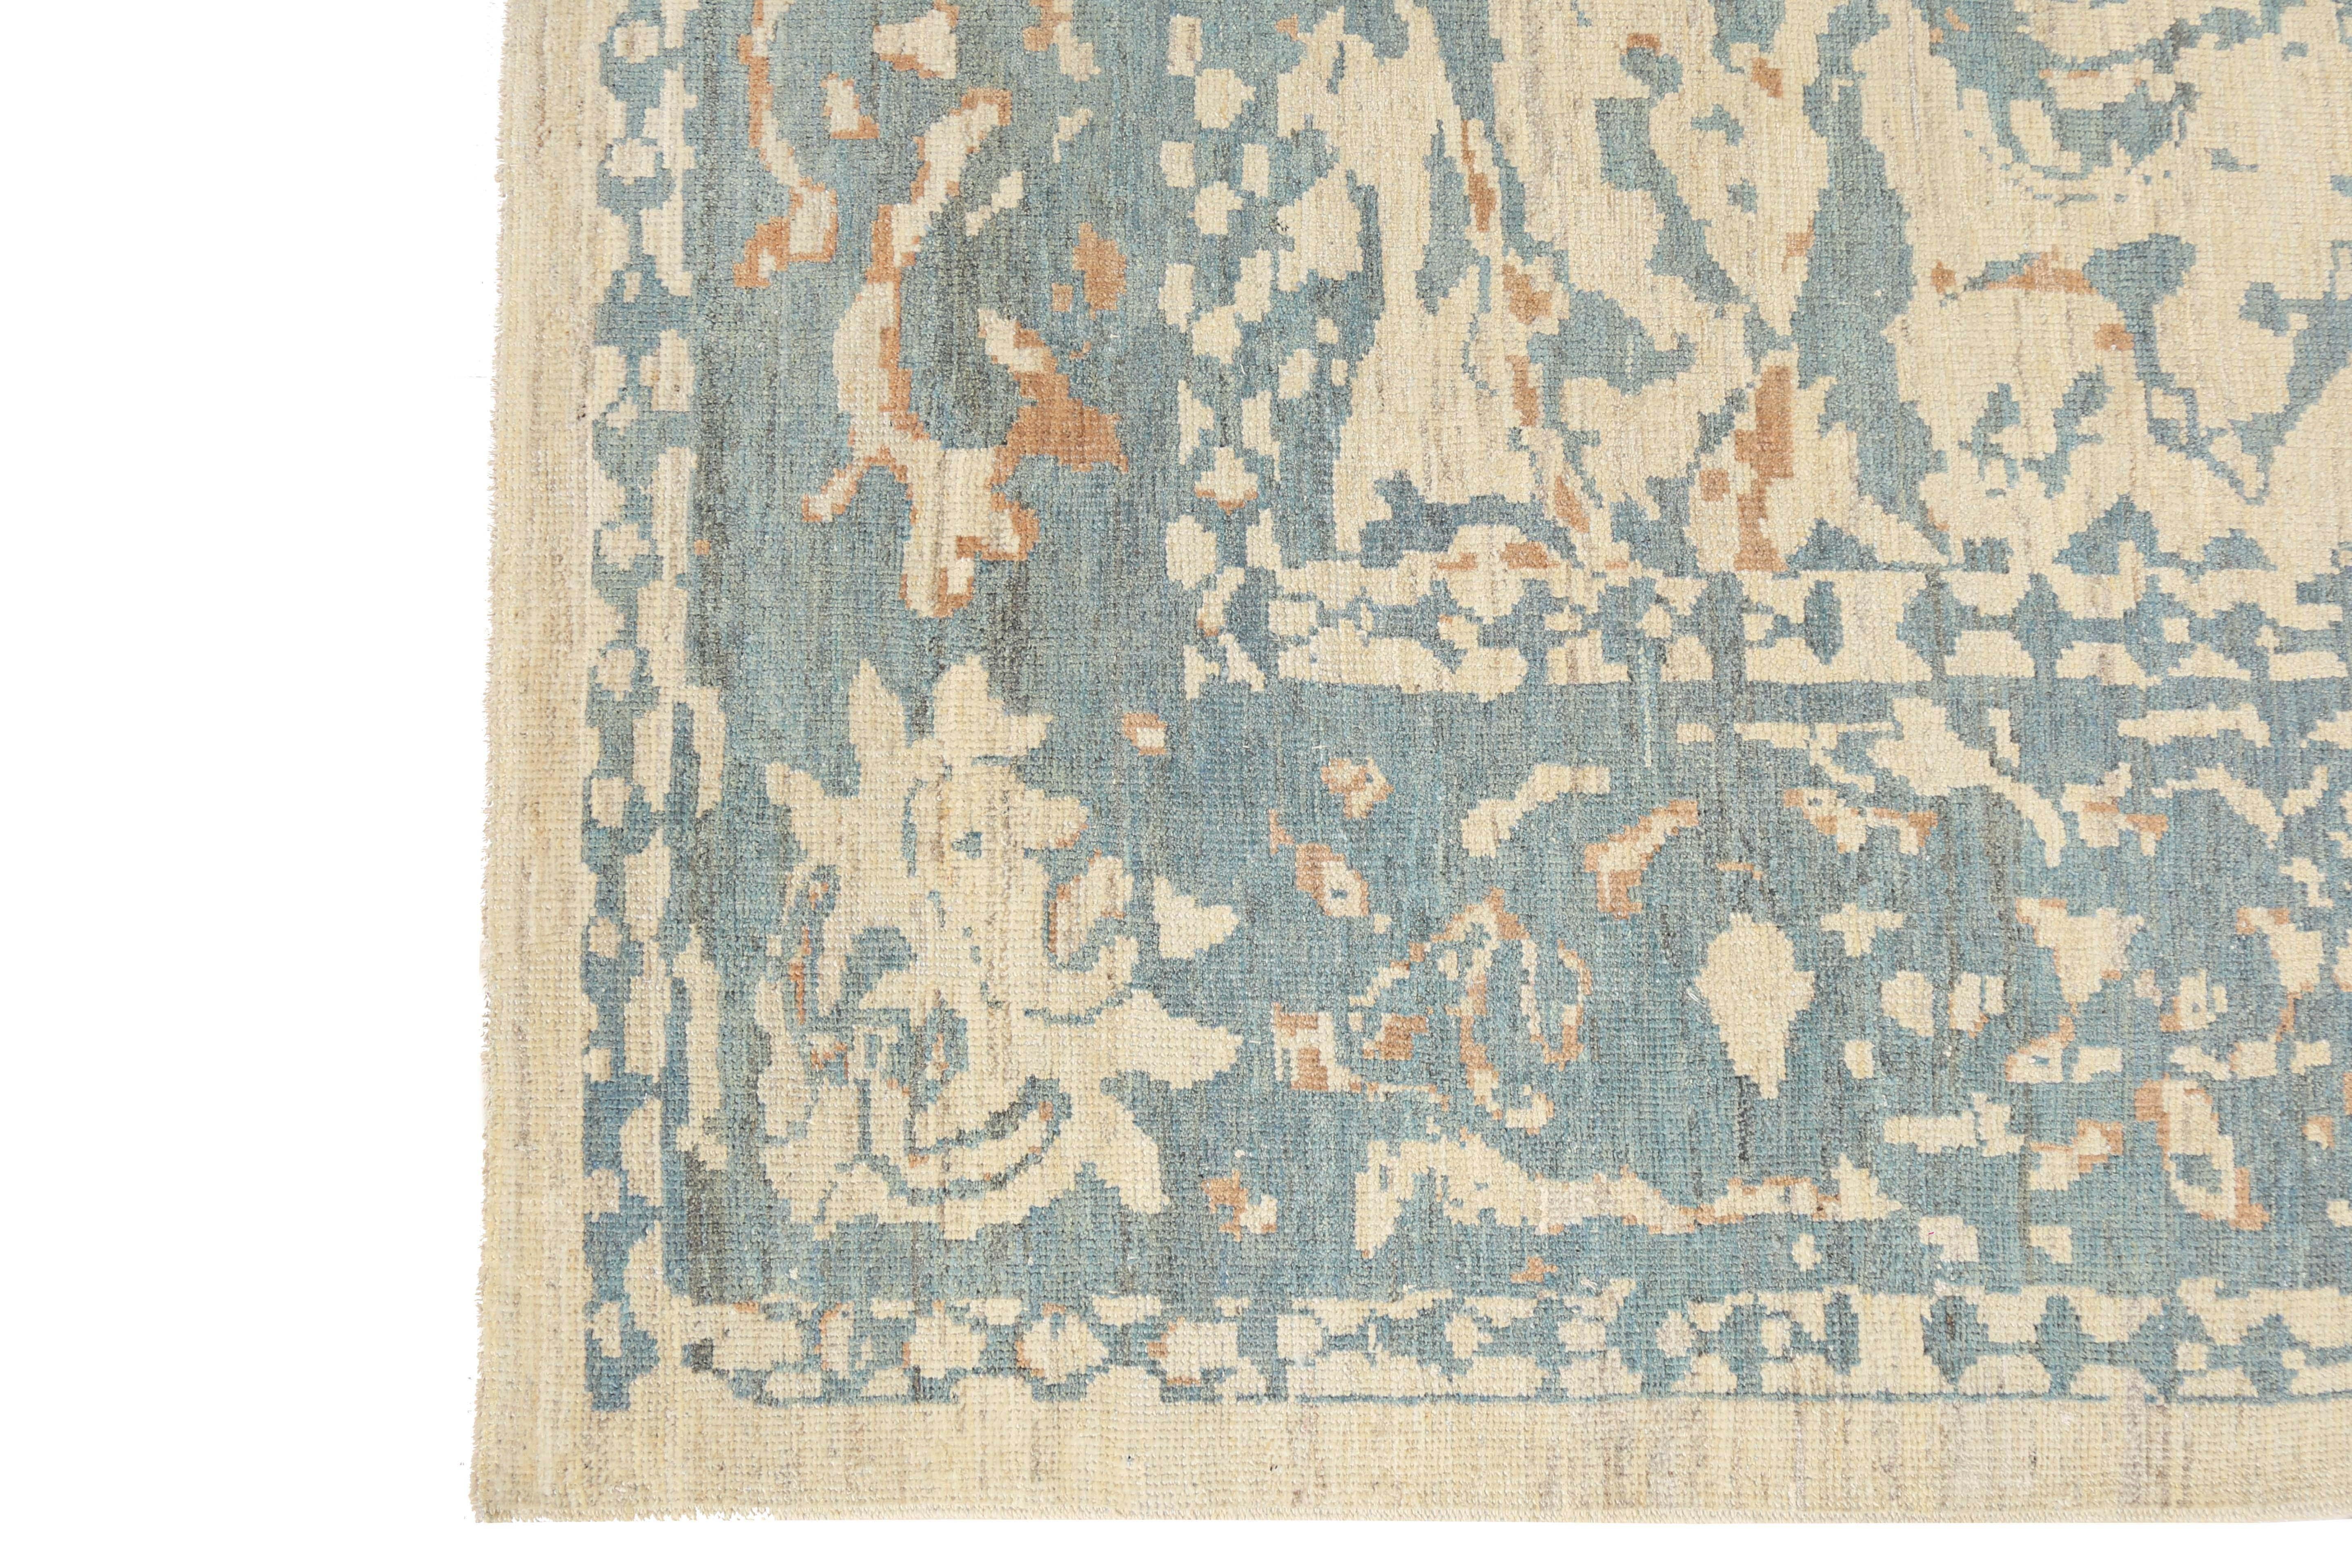 Handmade Turkish Sultanabad Rug - Modern Design with Blue, Green, and Orange Col For Sale 2